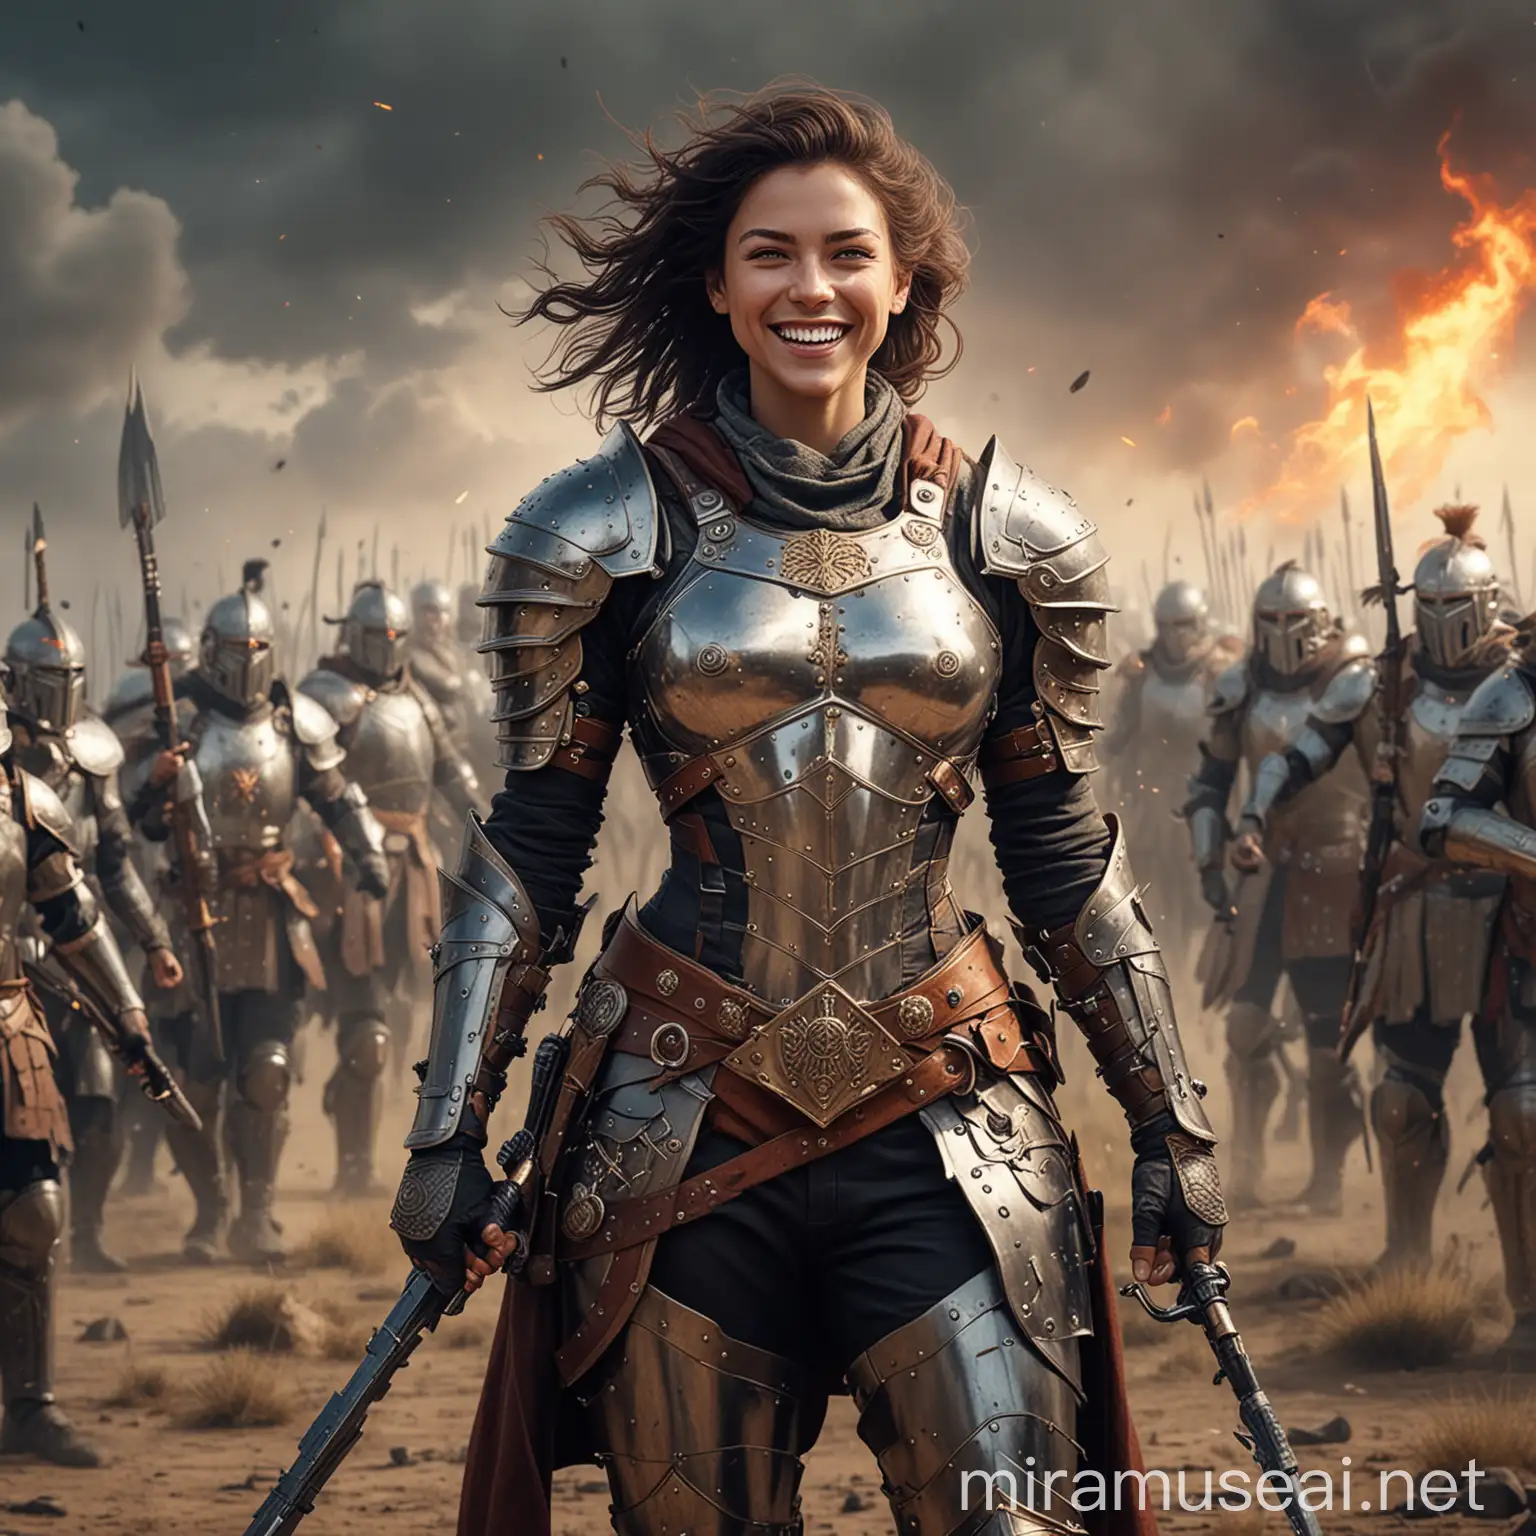 Warrior Woman Smiling in Armor Amid Battle